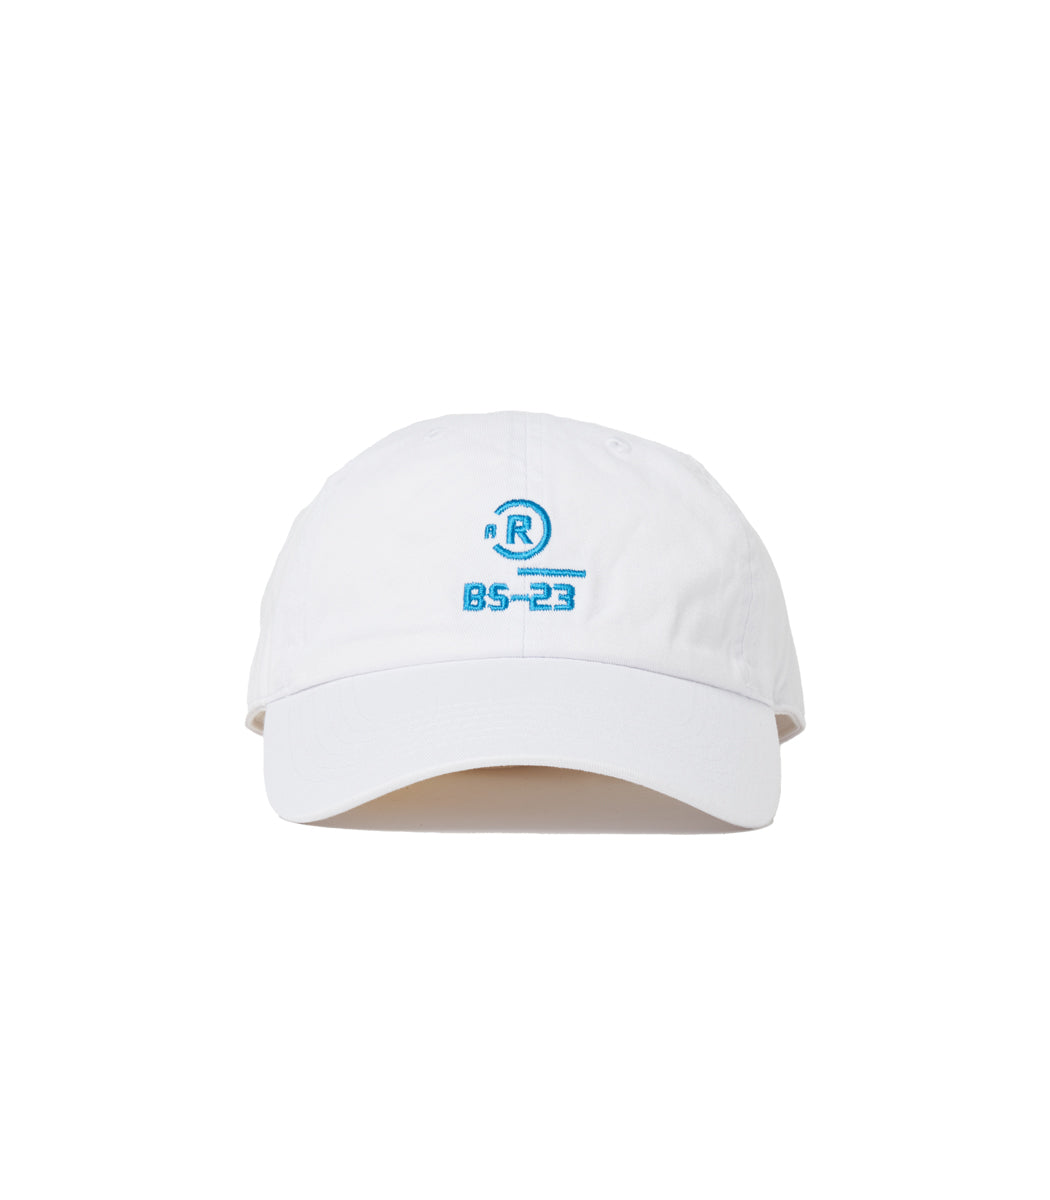 Load image into Gallery viewer, AOR BS-23 SOUVENIR CAP WHITE
